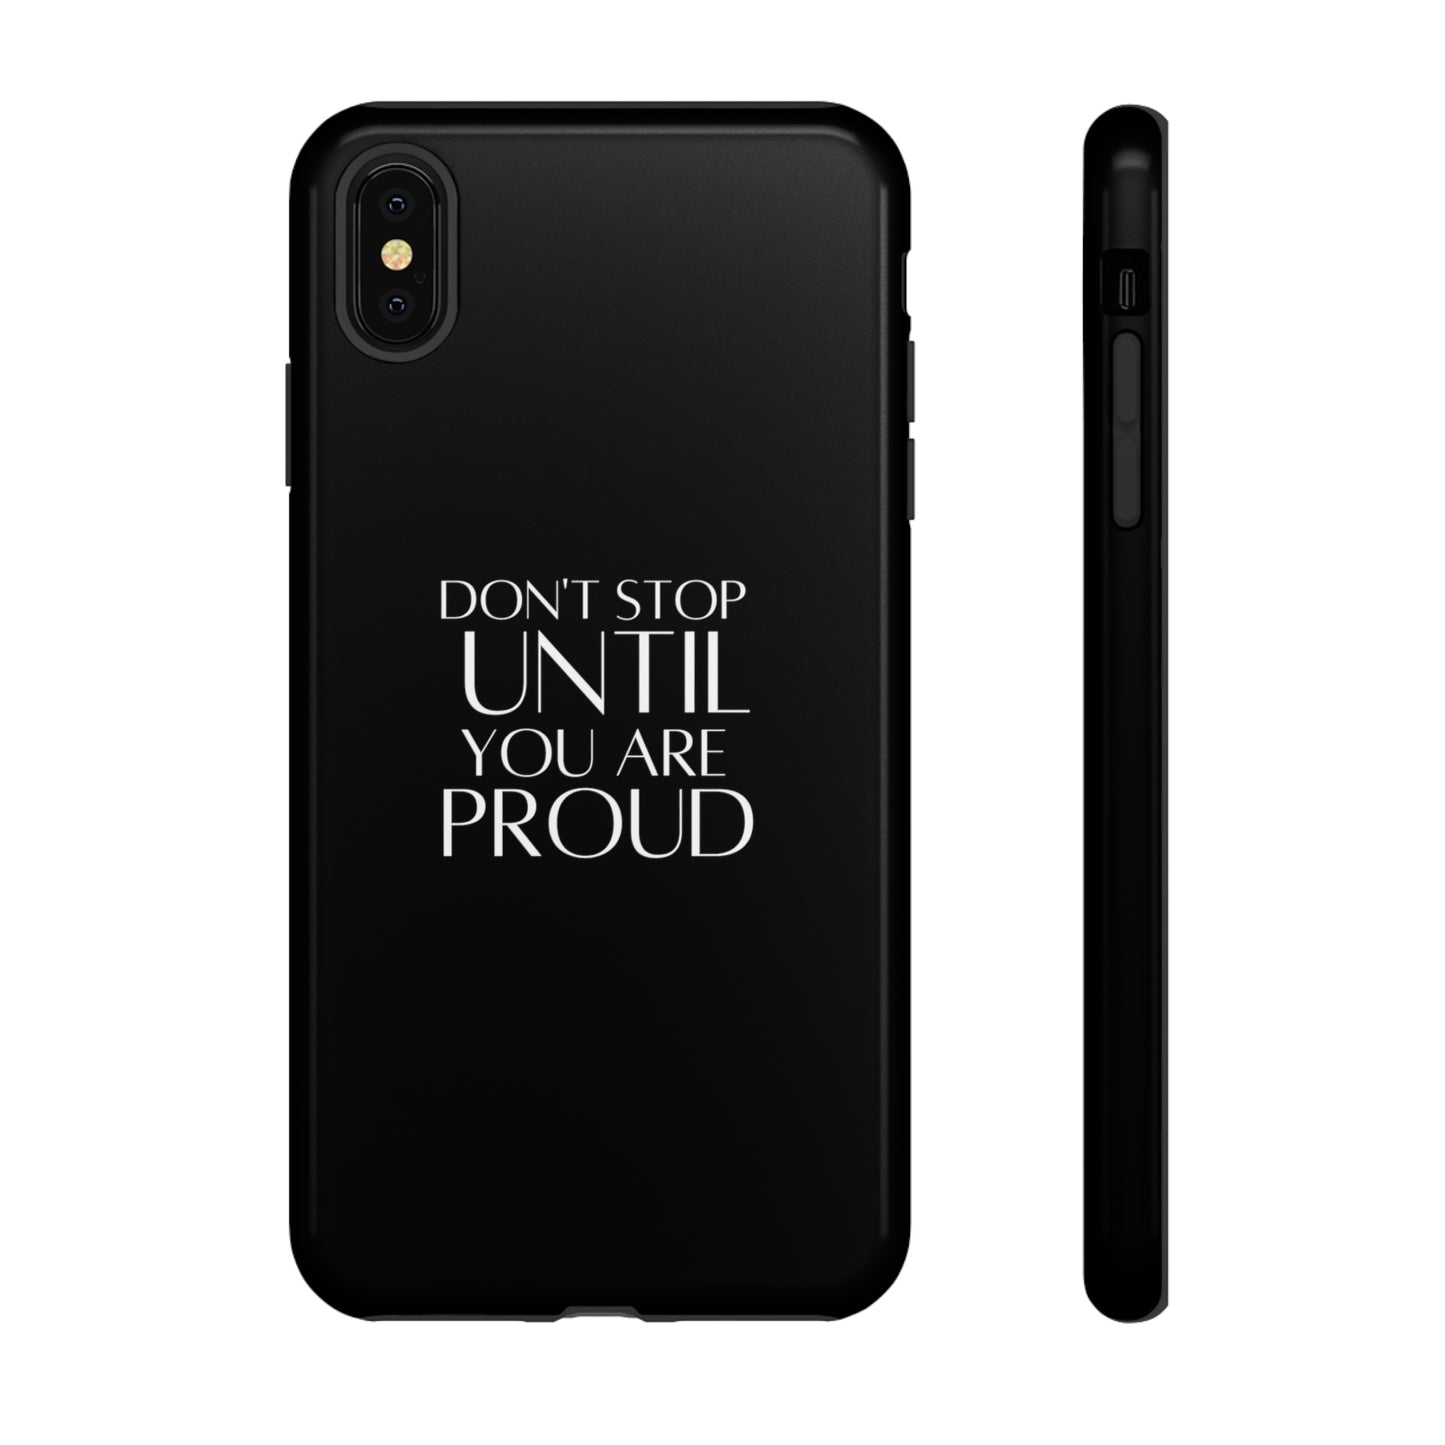 Inspire Empire || Tough Cases || Don't stop until you are proud